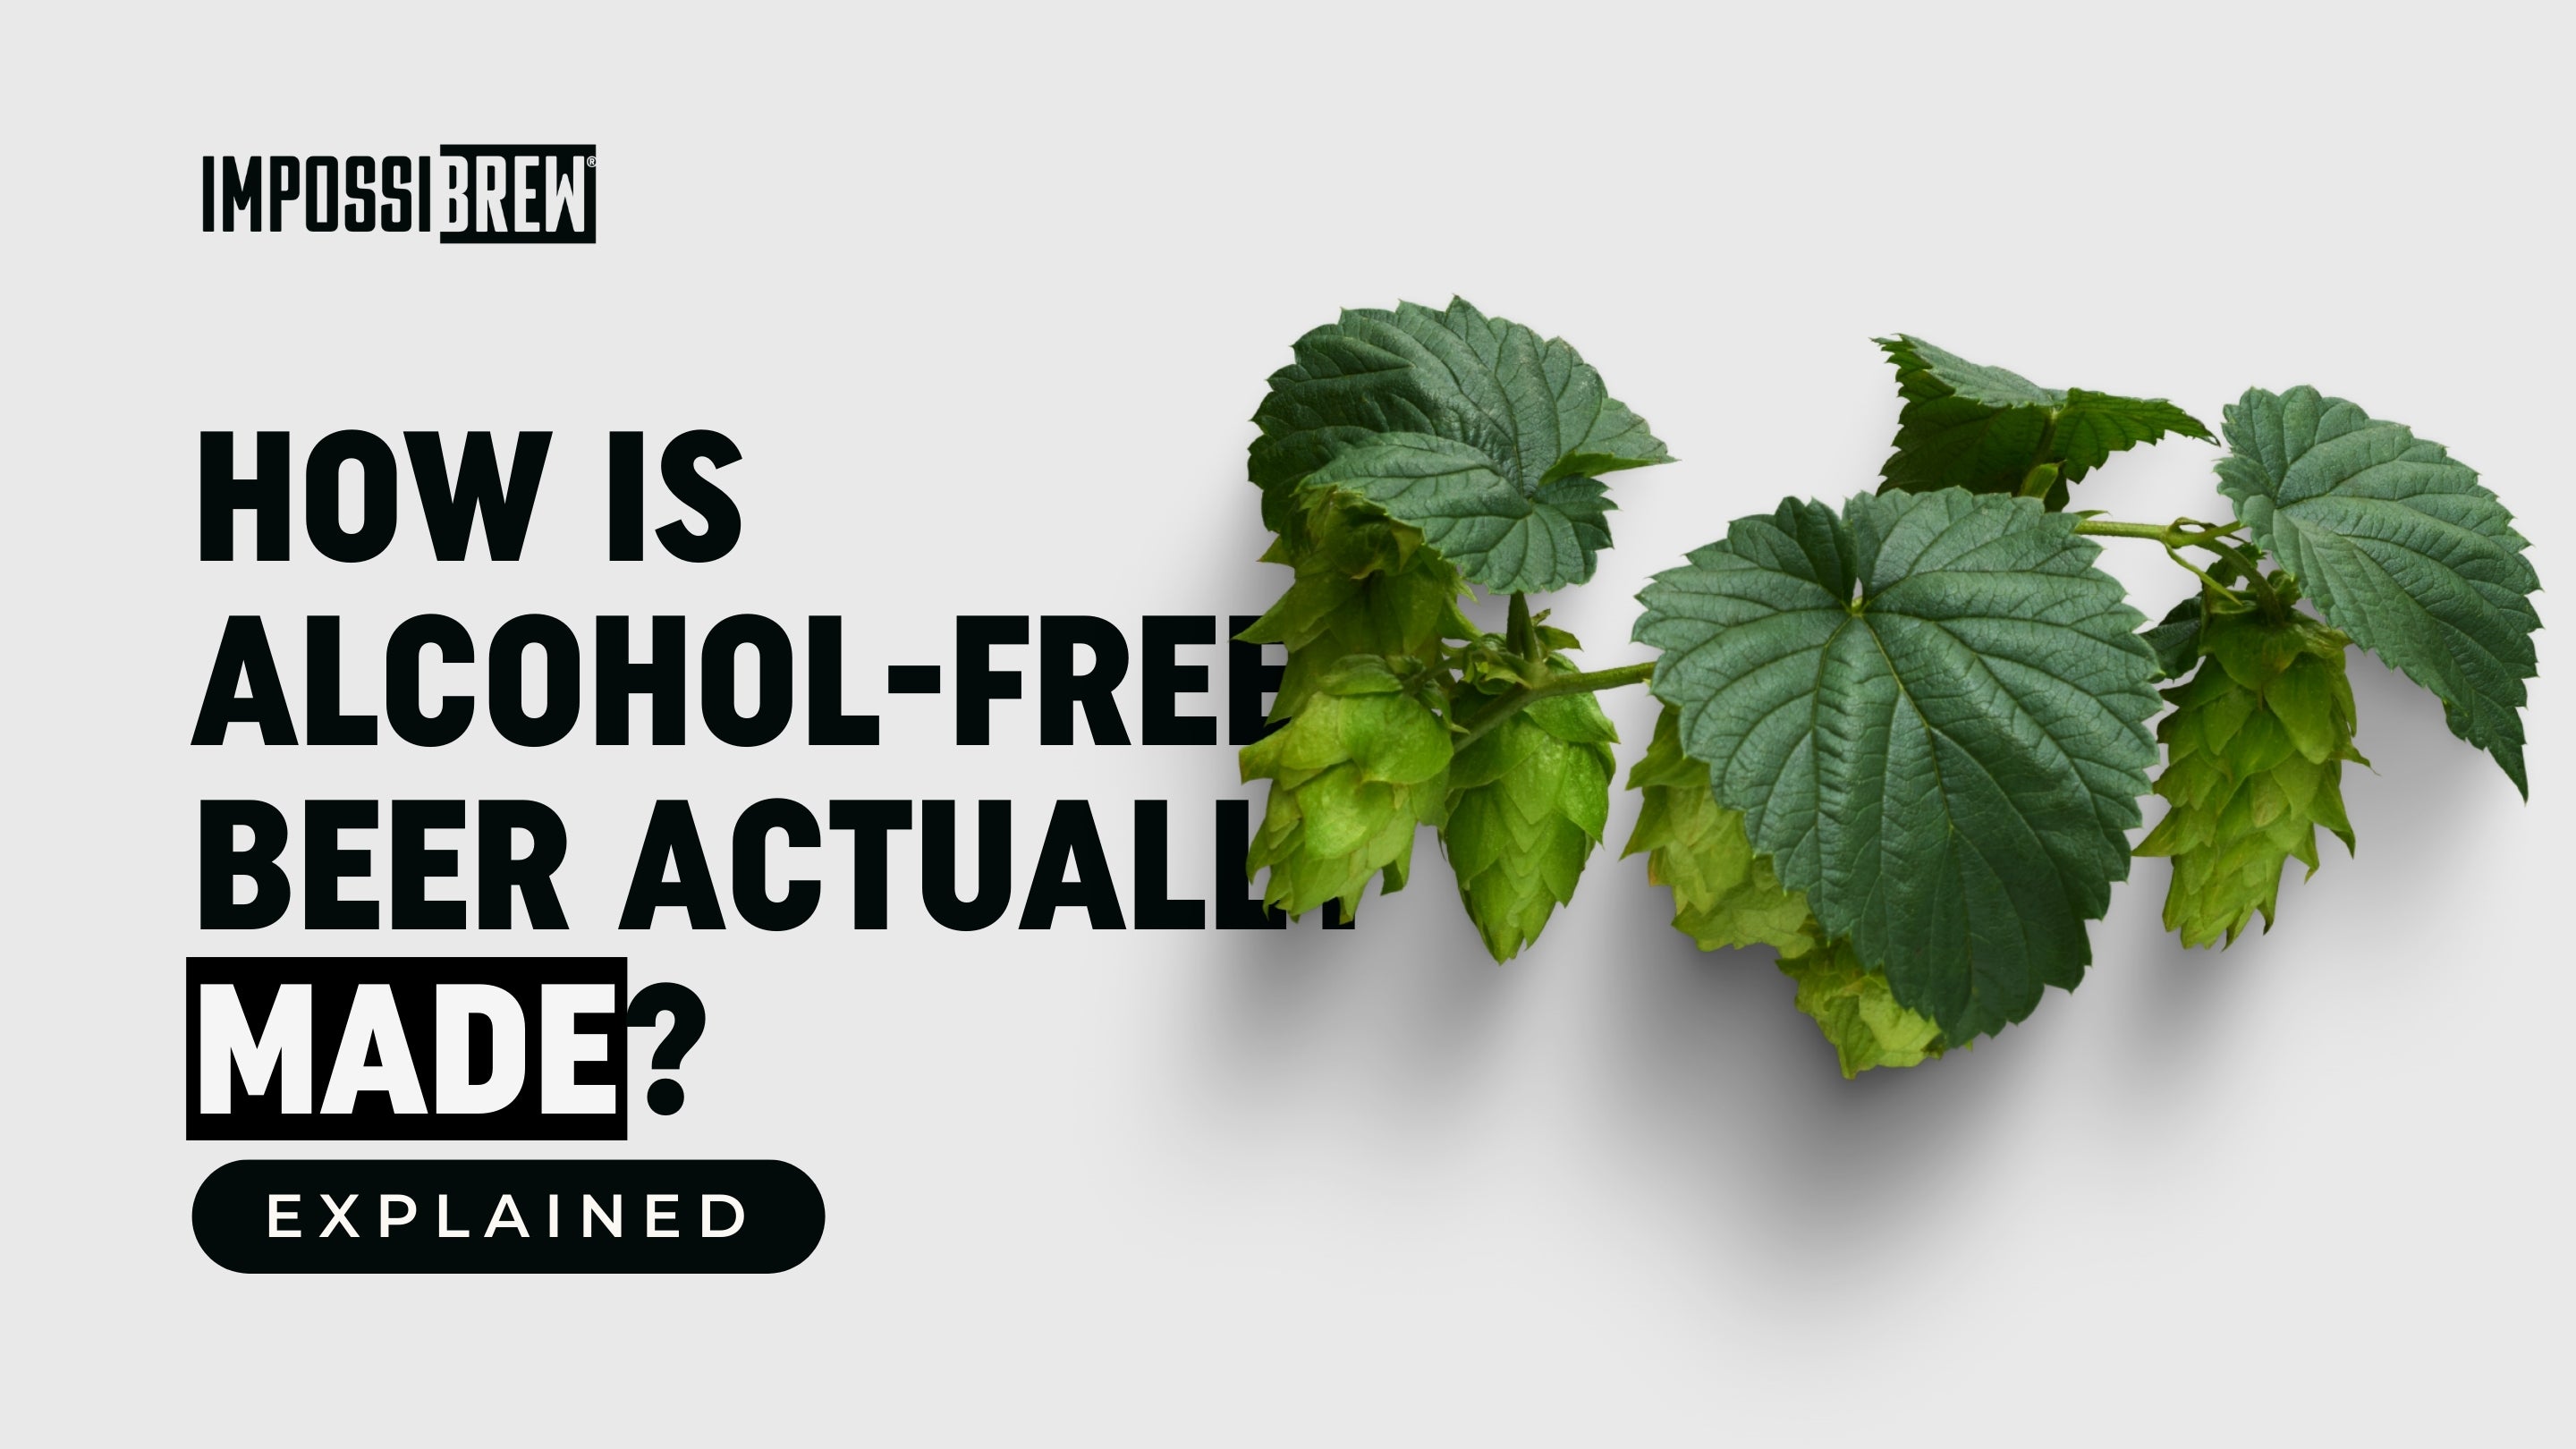 HOW IS ALCOHOL-FREE BEER MADE? – IMPOSSIBREW®